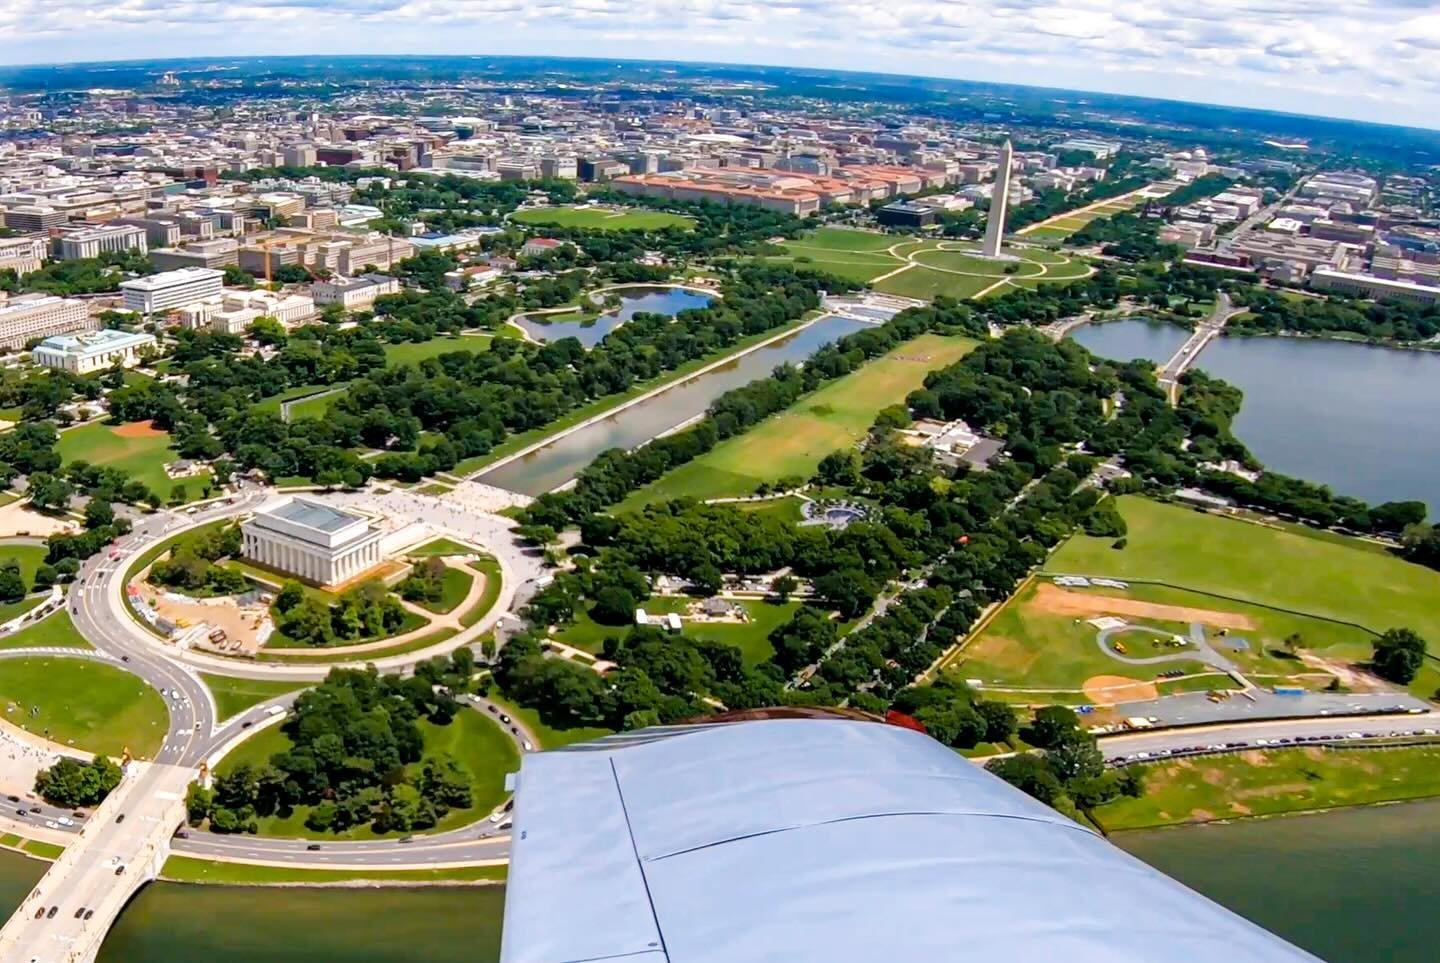 🚨 General Aviation history was made 🇺🇸 Our DC Flyover just dropped on the channel 👉🏻 YouTube.com/FlyWithBruno

You&rsquo;ve seen the reel, now it&rsquo;s for the 4K footage! Close to 60 planes flew into the most restricted airspace in the countr